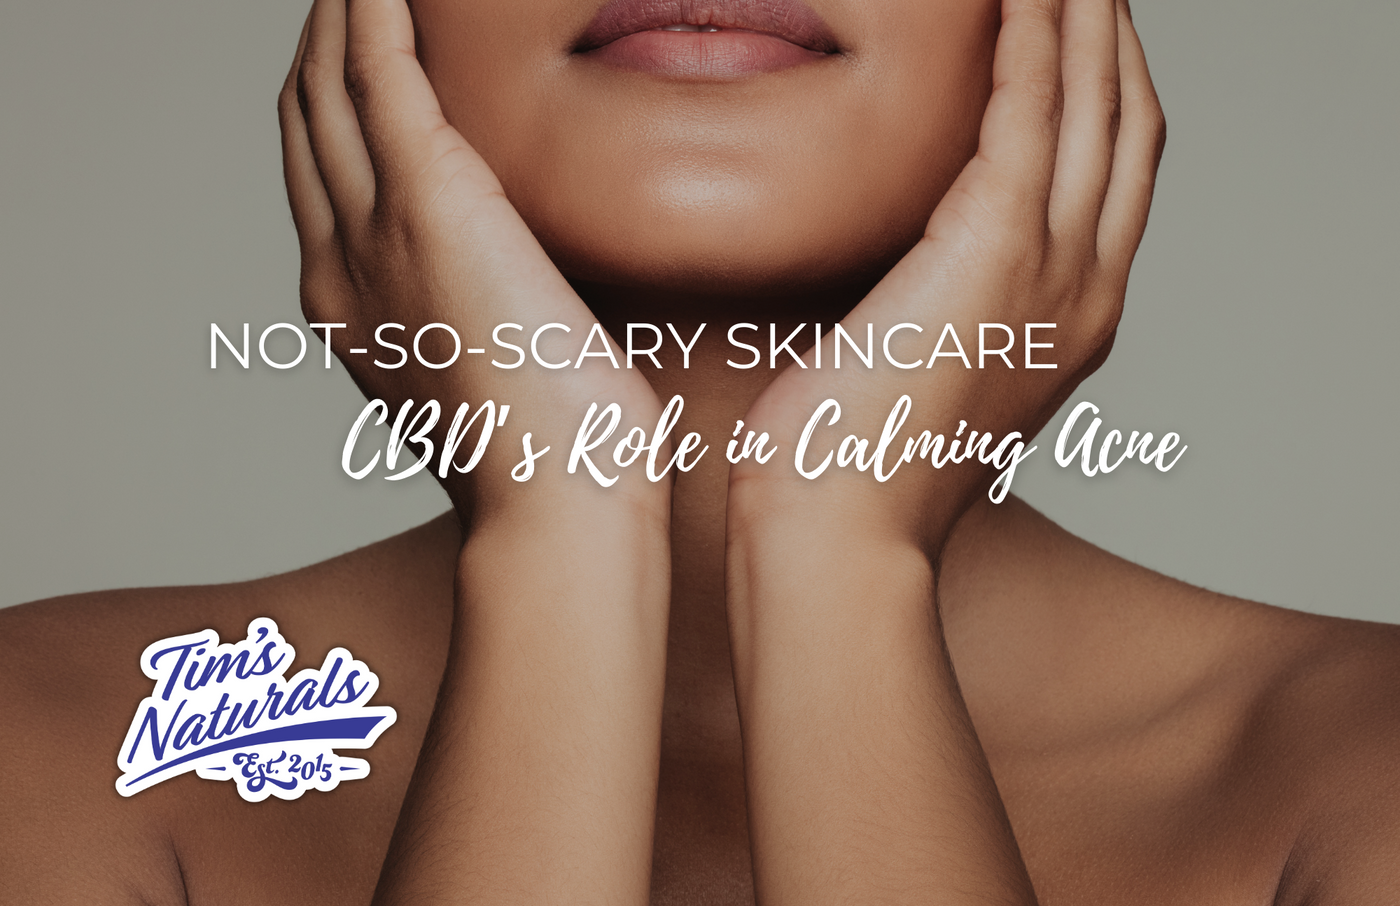 Not-So-Scary Skincare: CBD's Role in Calming Acne